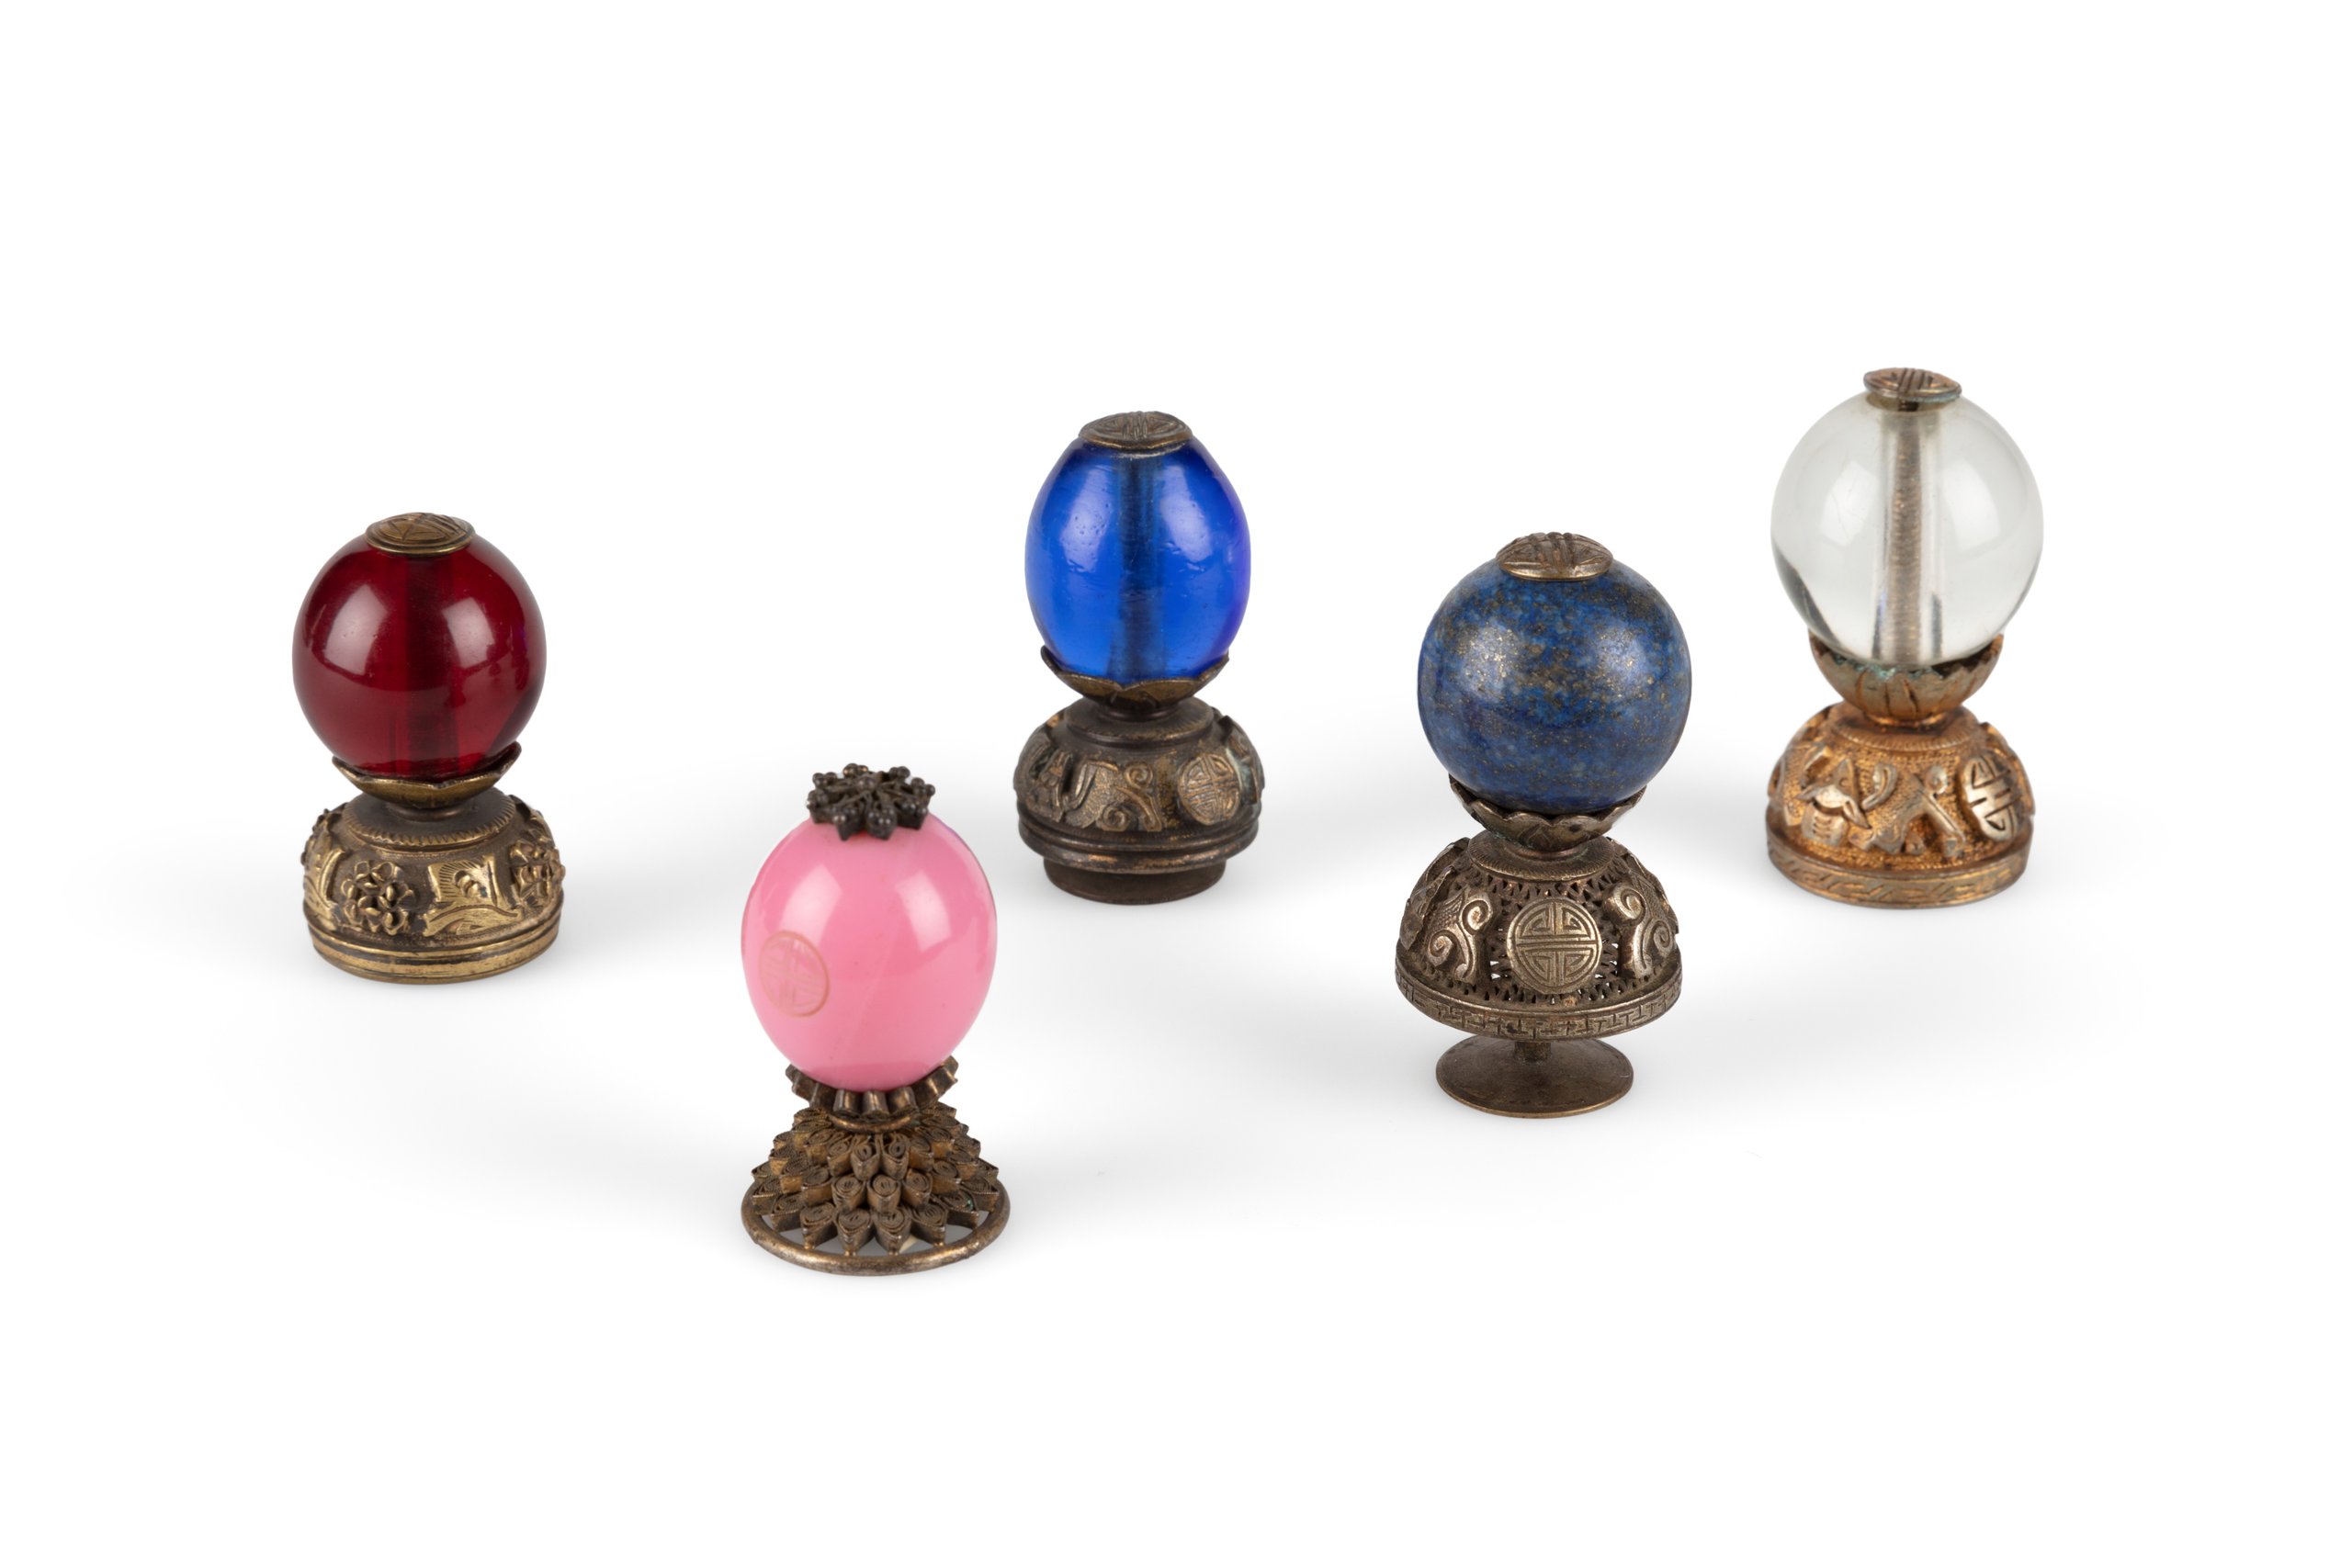 Full set of nine ranks of hat finials for Chinese court officials